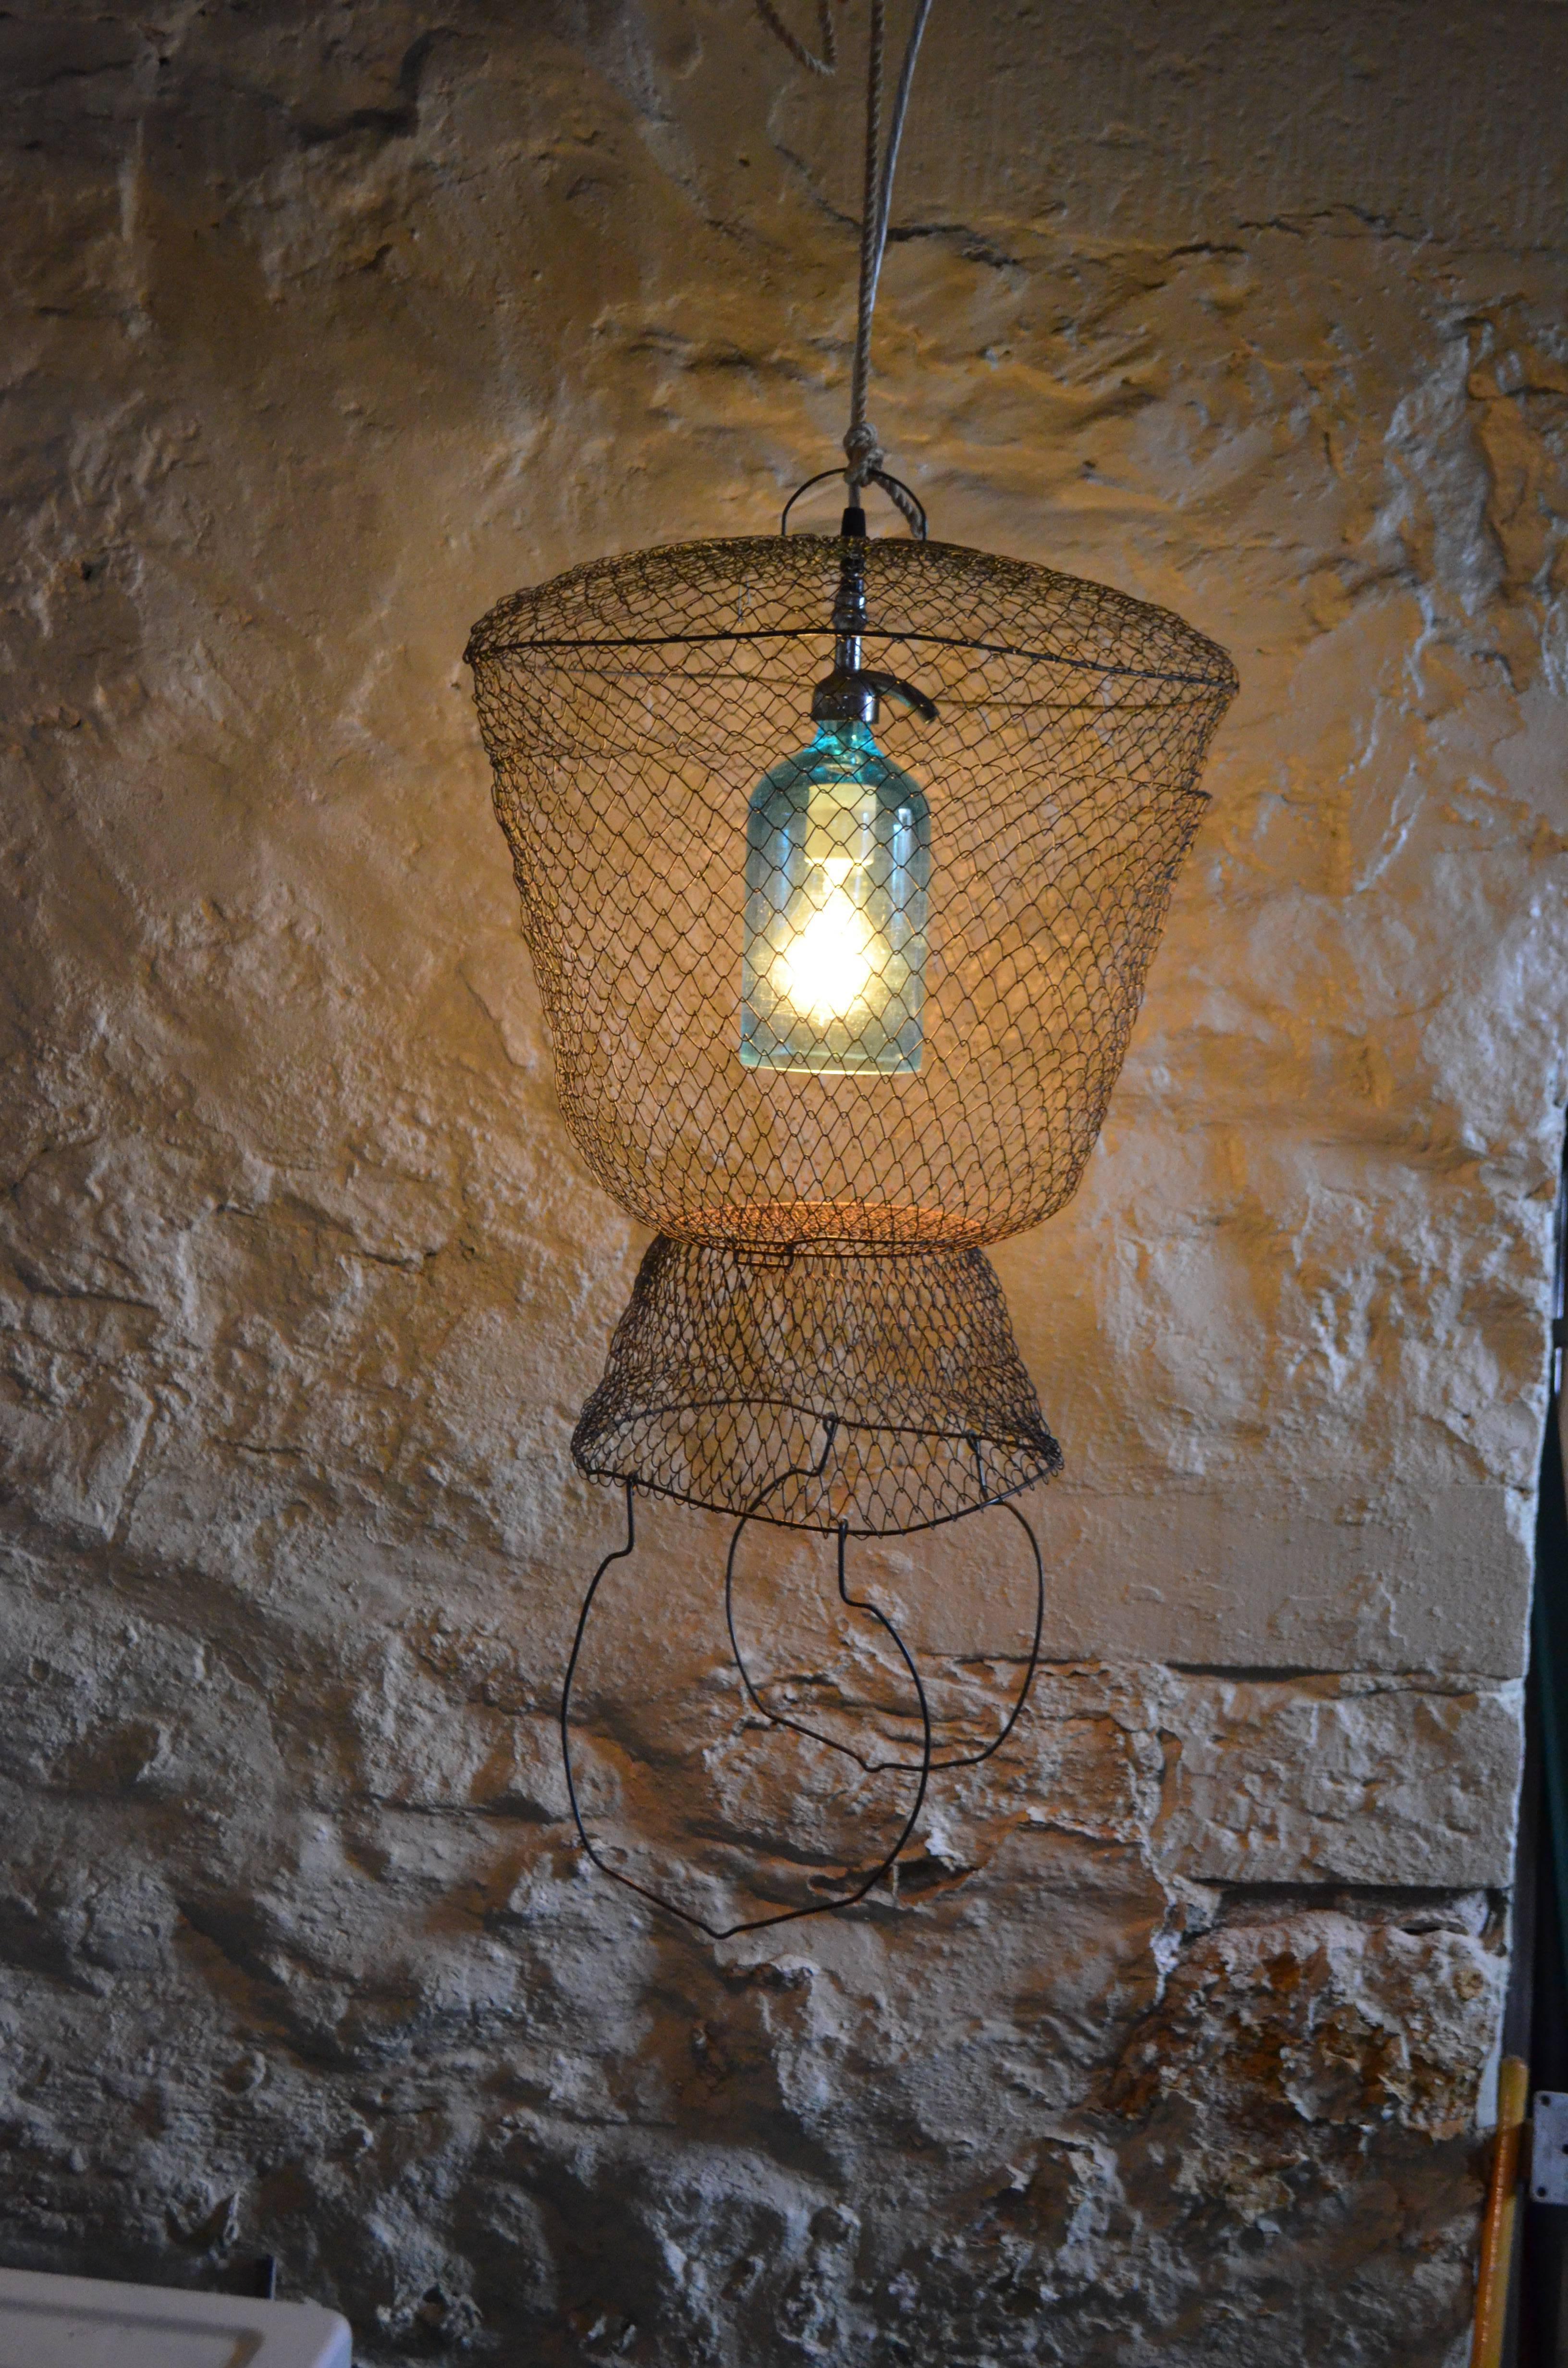 20th Century Pendant Light from Seltzer Bottle Suspended in French, Steel Mesh Fish Basket